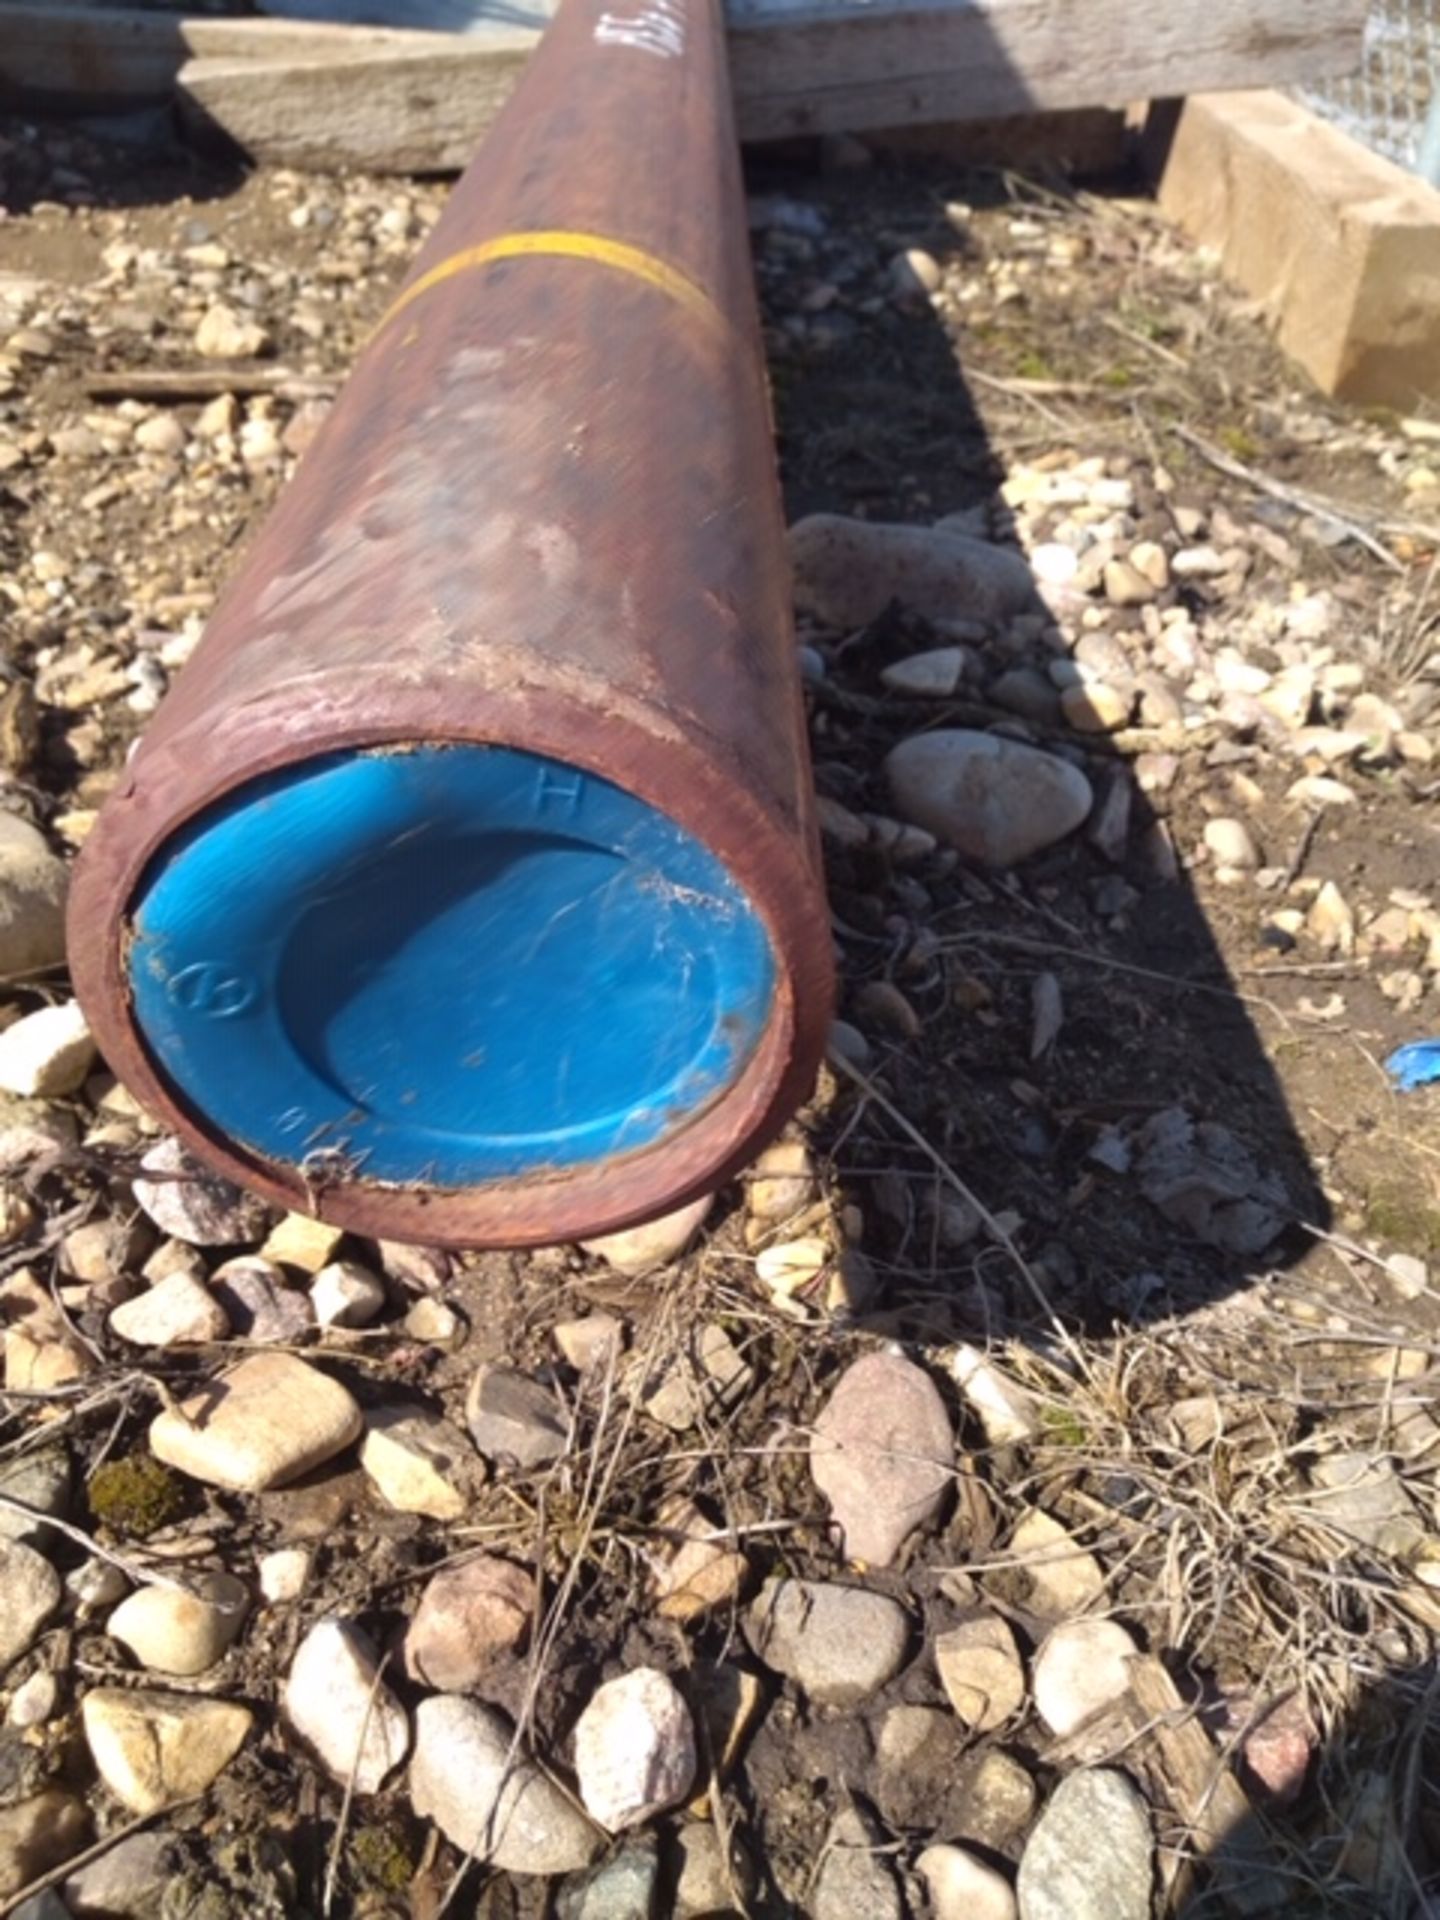 39FTX4" HEAVY WALL PIPE - Image 2 of 2